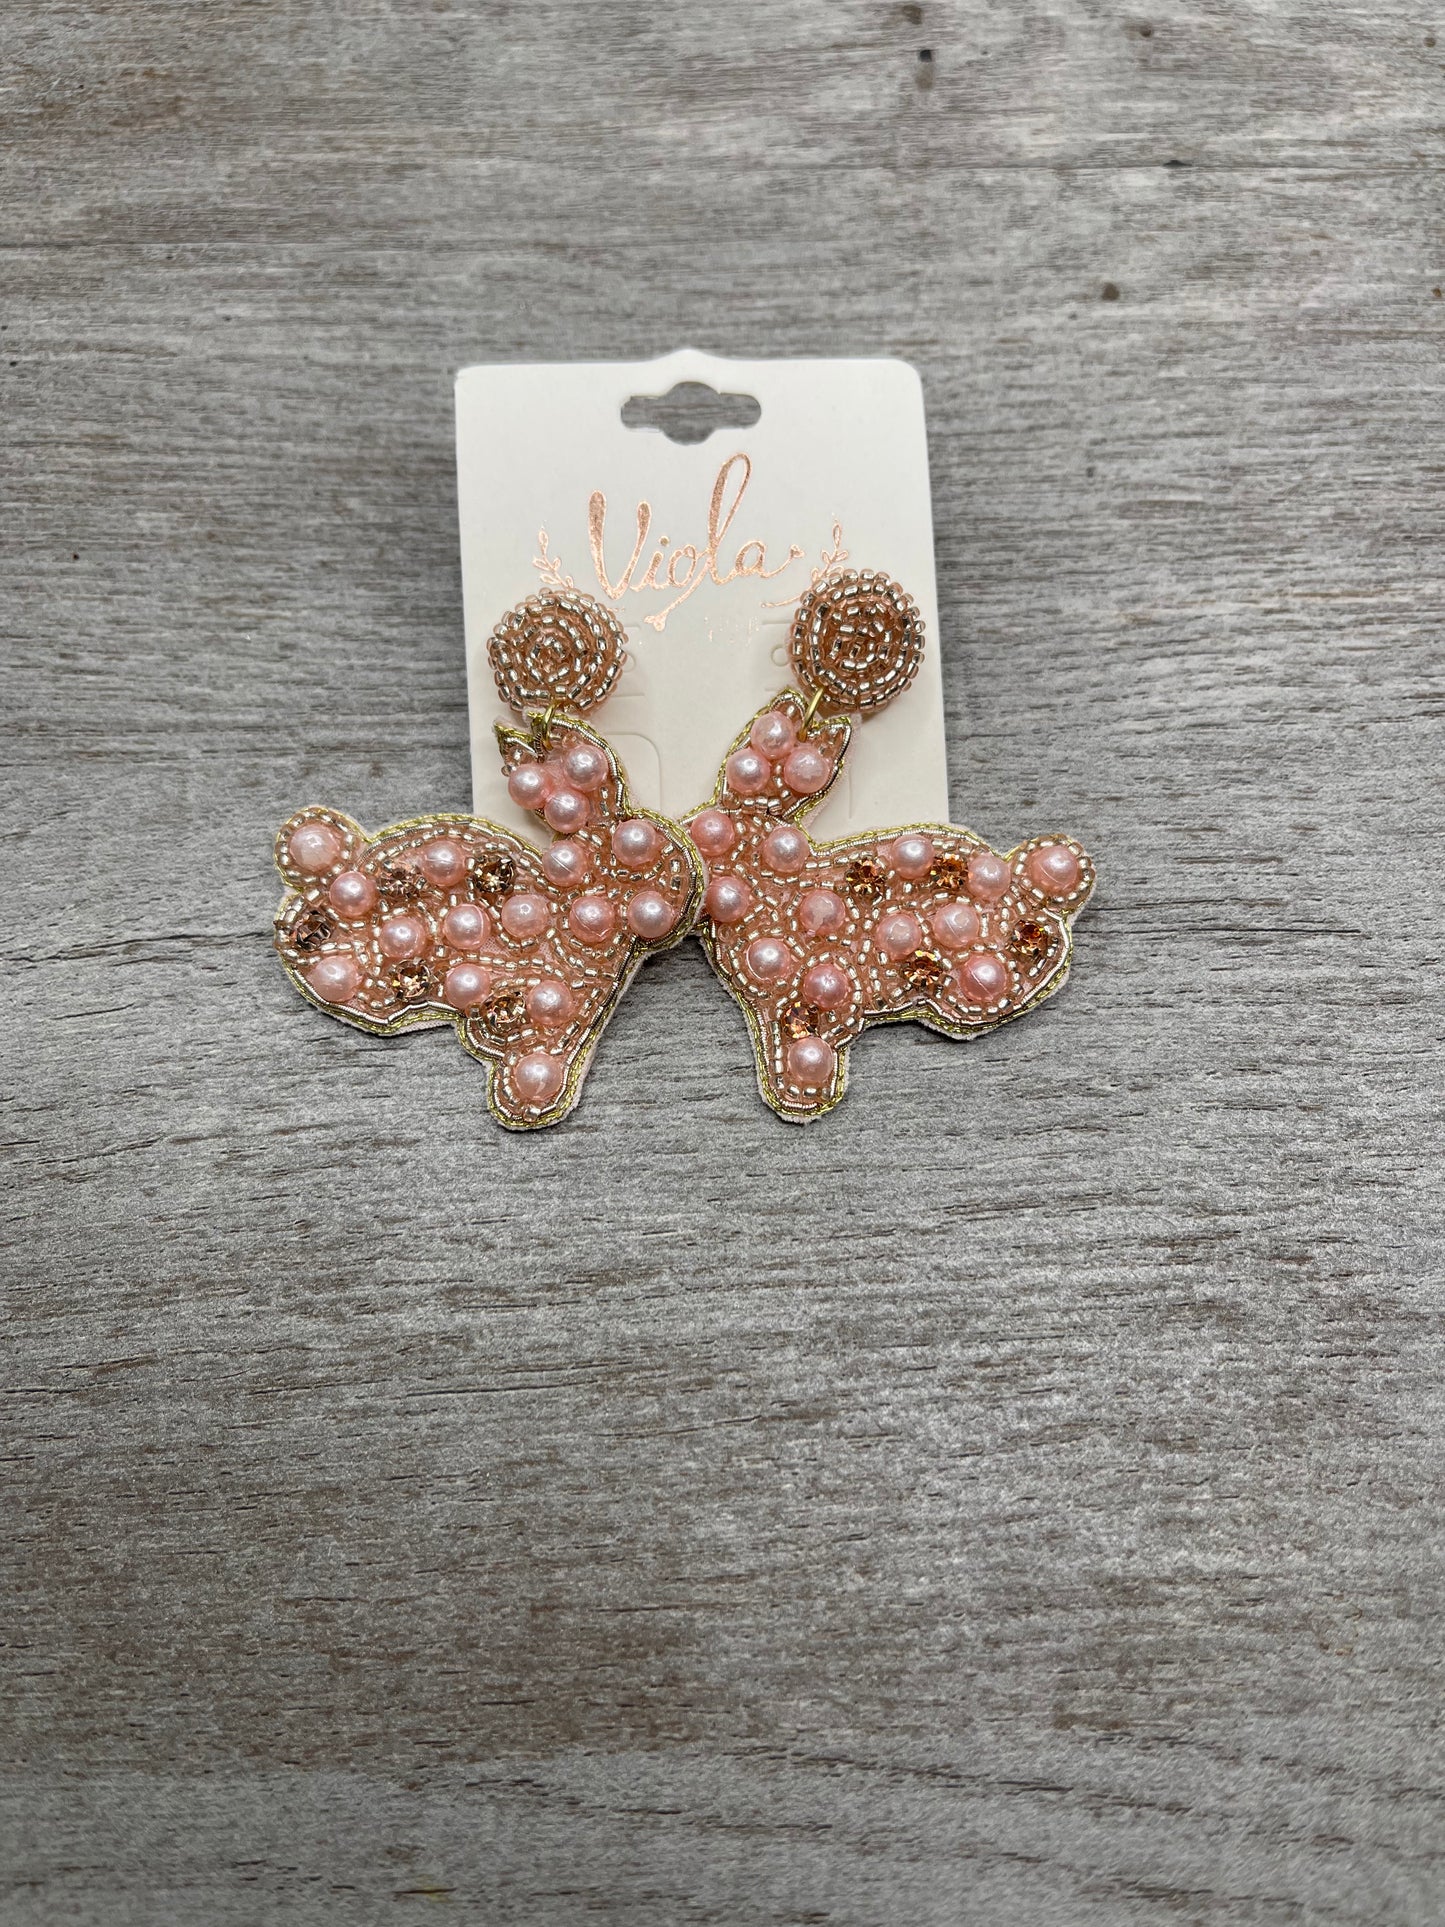 Bunny Earrings {Multiple Styles Available}